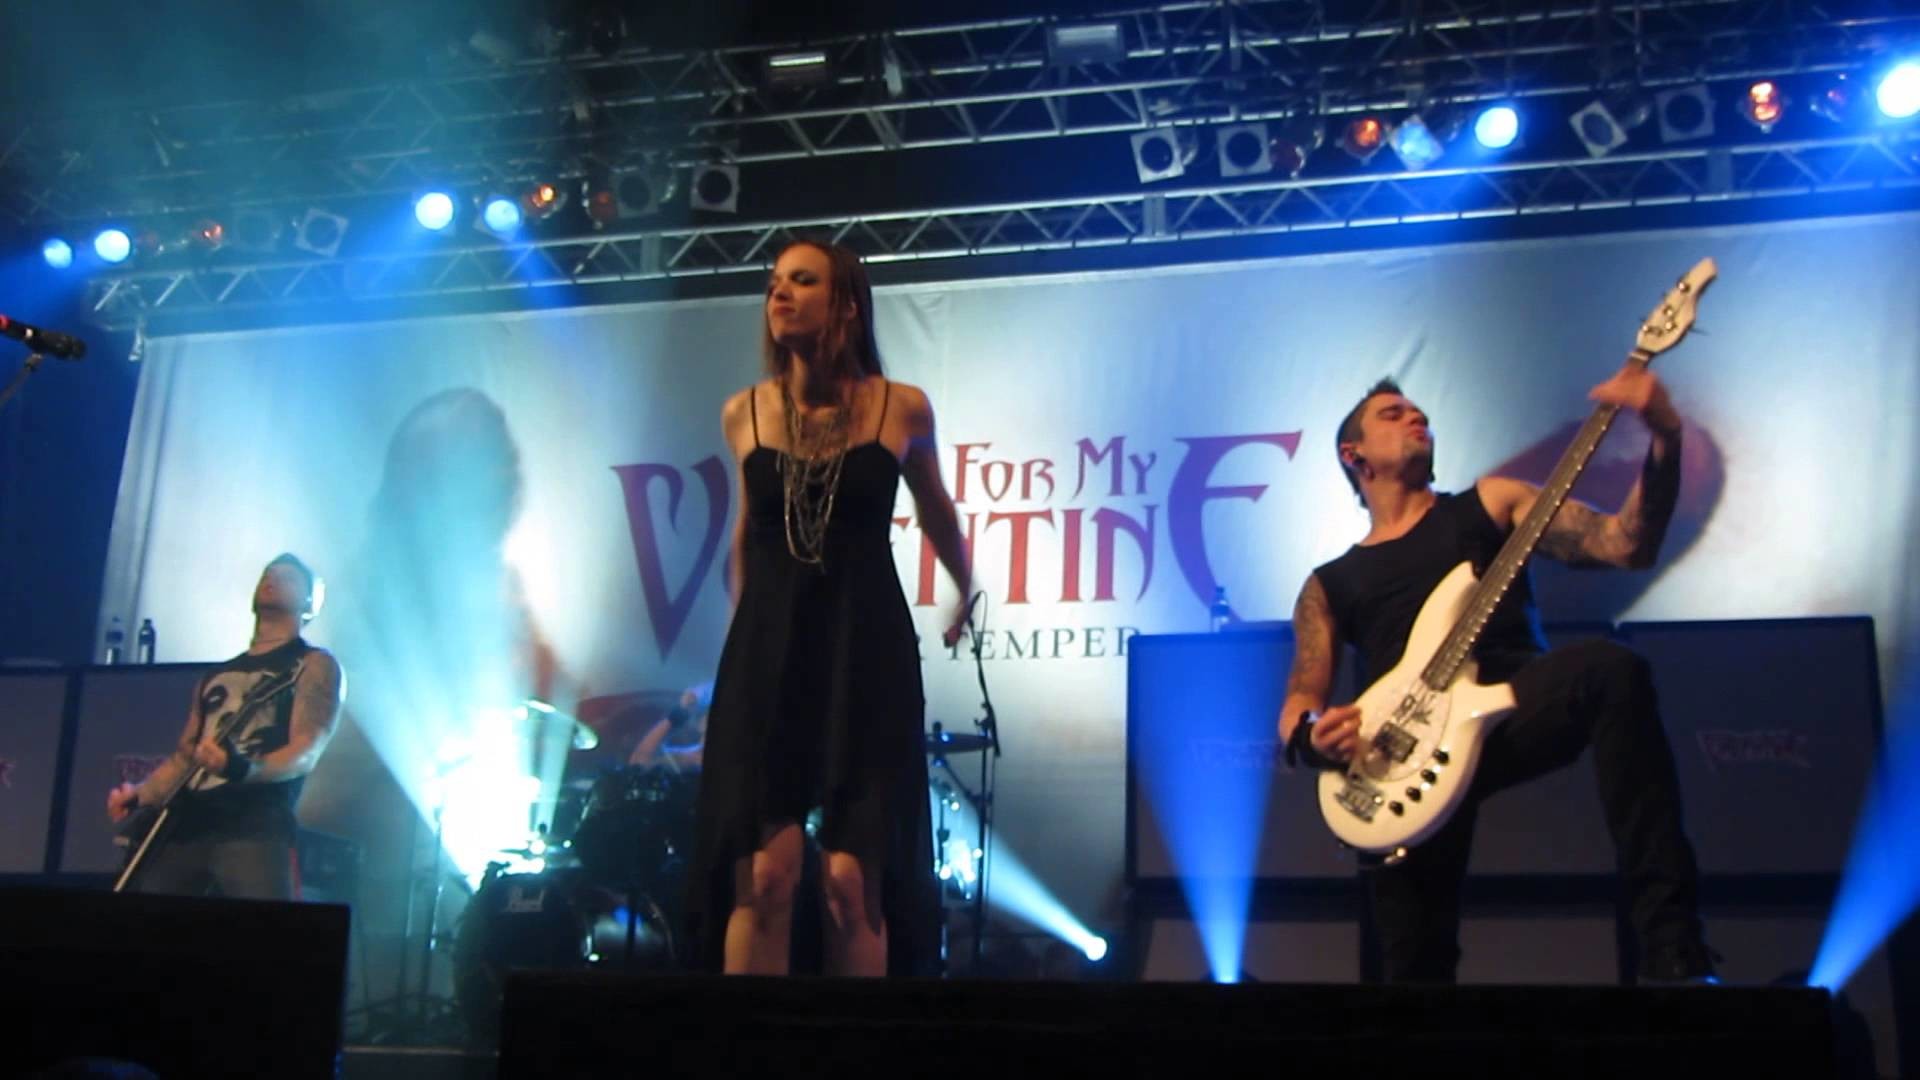 1920x1080 Bullet For My Valentine + Lzzy Hale from Halestorm - Dirty Little Secrets  Live in Berlin 22.03.2013